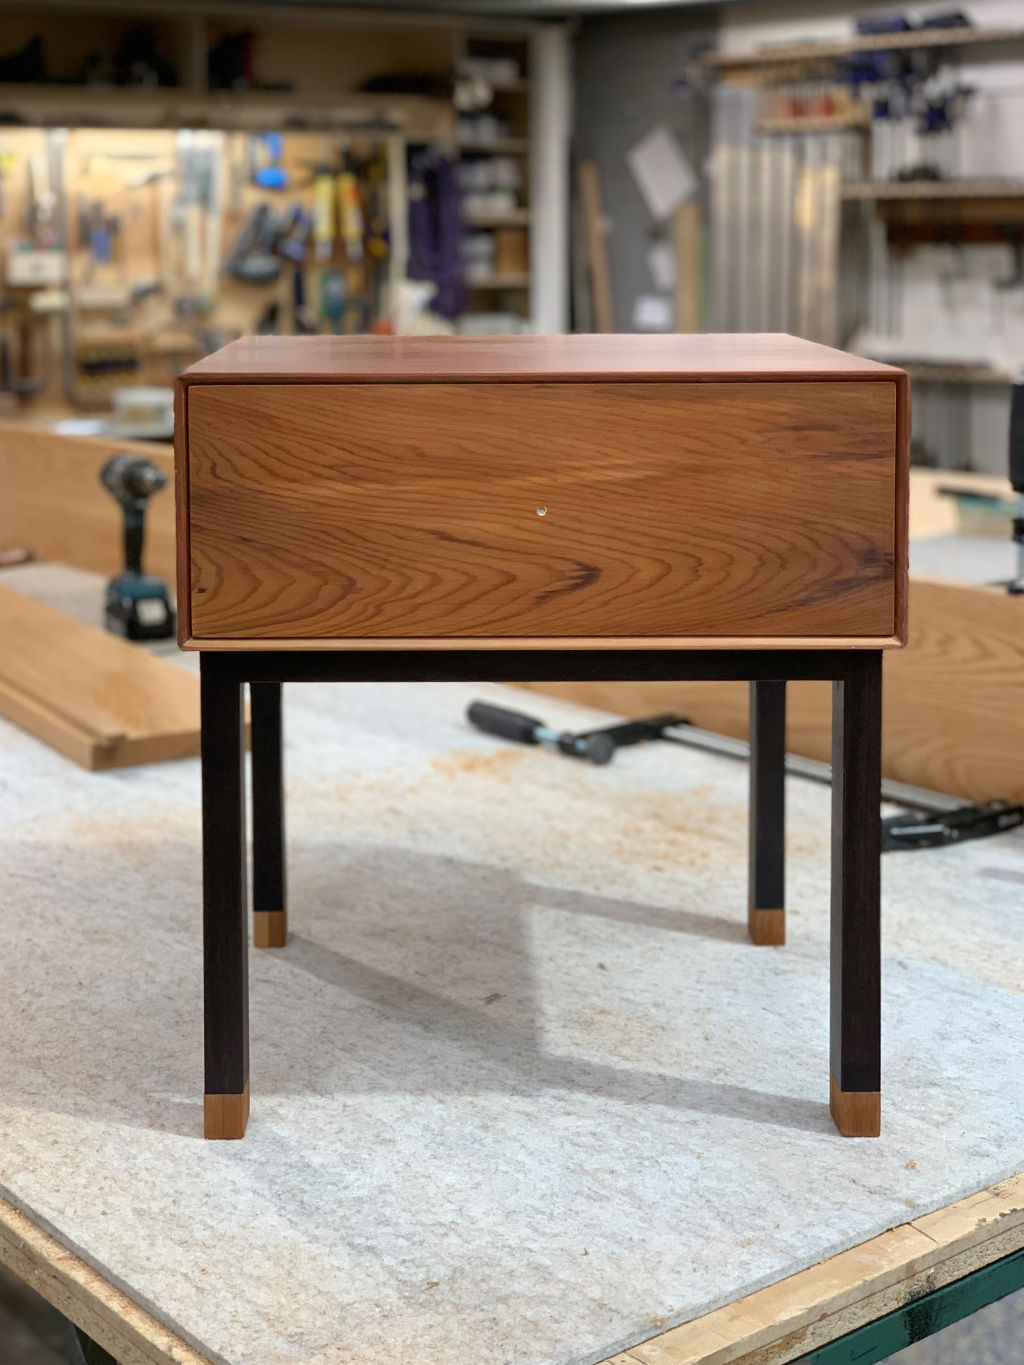 Construction of the bedside tables from West Wood. Photo: Supplied